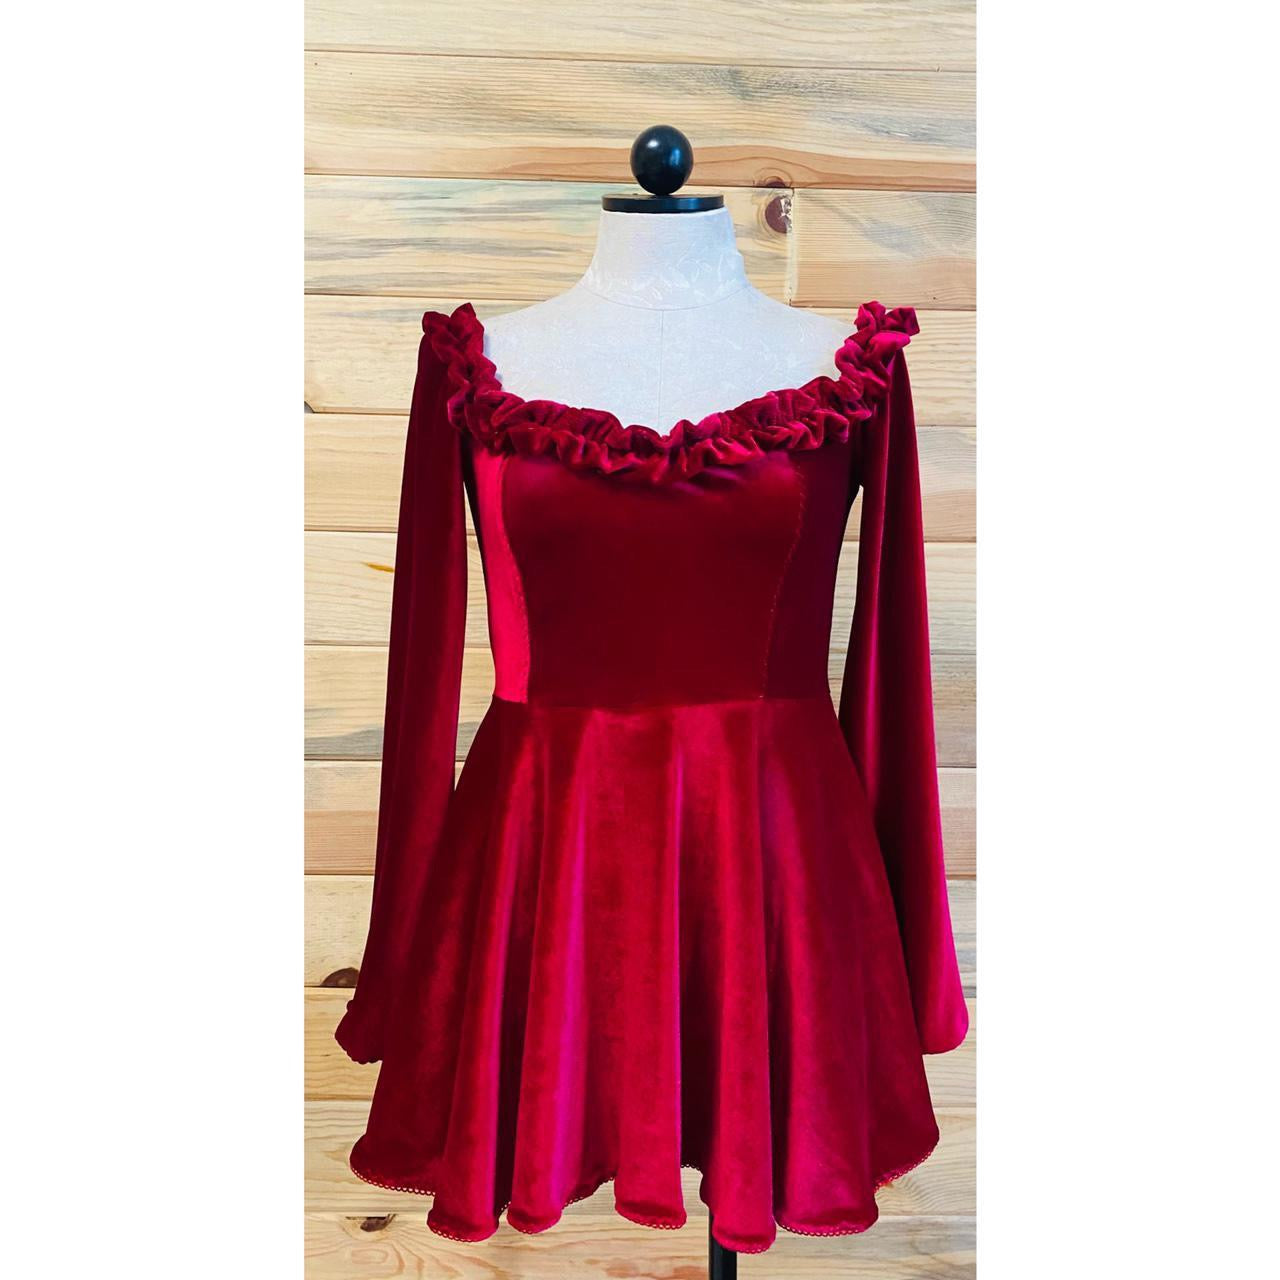 The Maggie Dress in Red